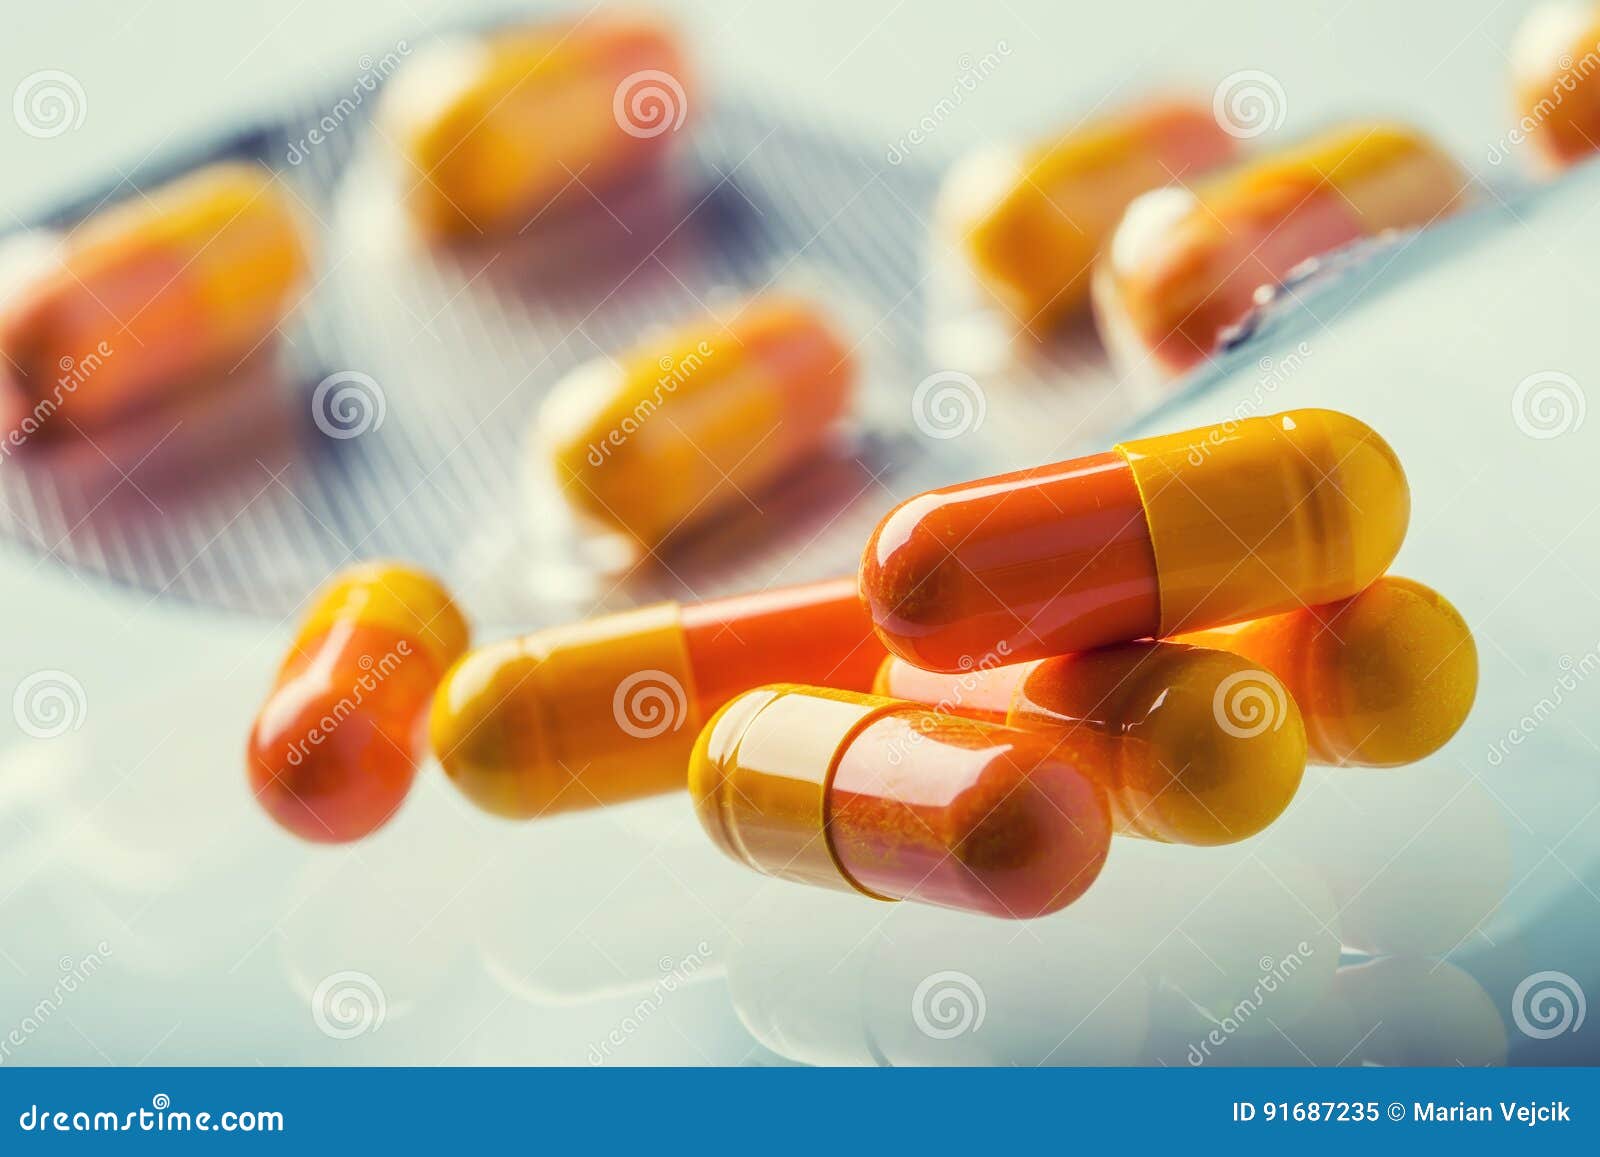 pills tablets capsule or medicament freely laid on glass background